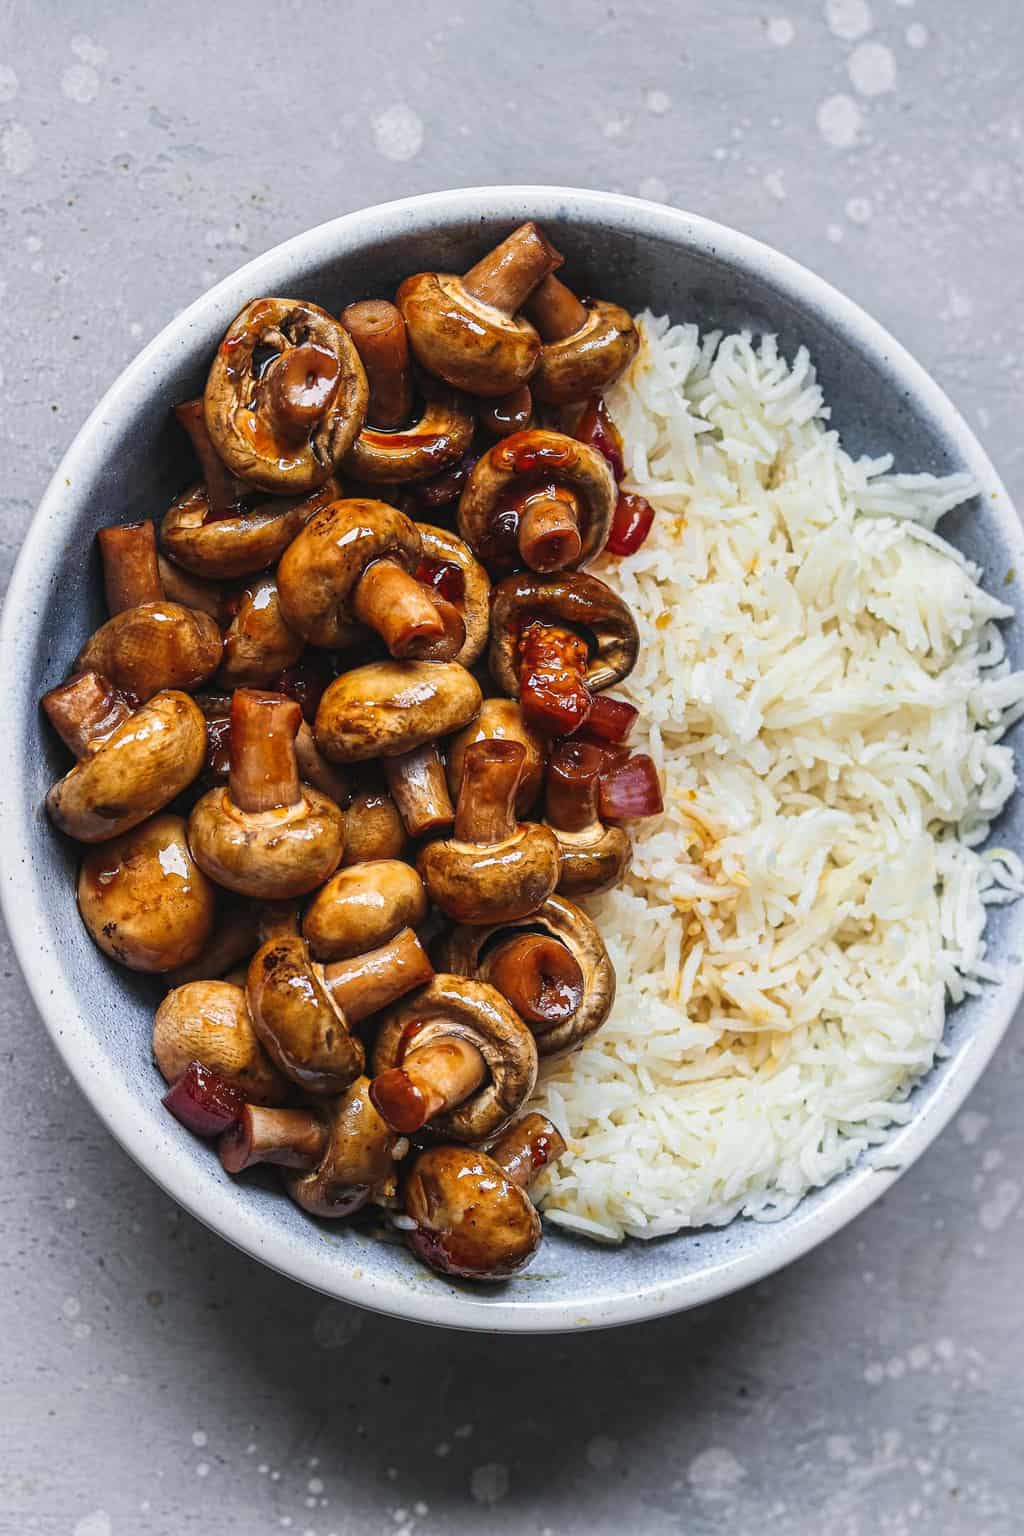 Miso mushrooms with rice in a blue bowl